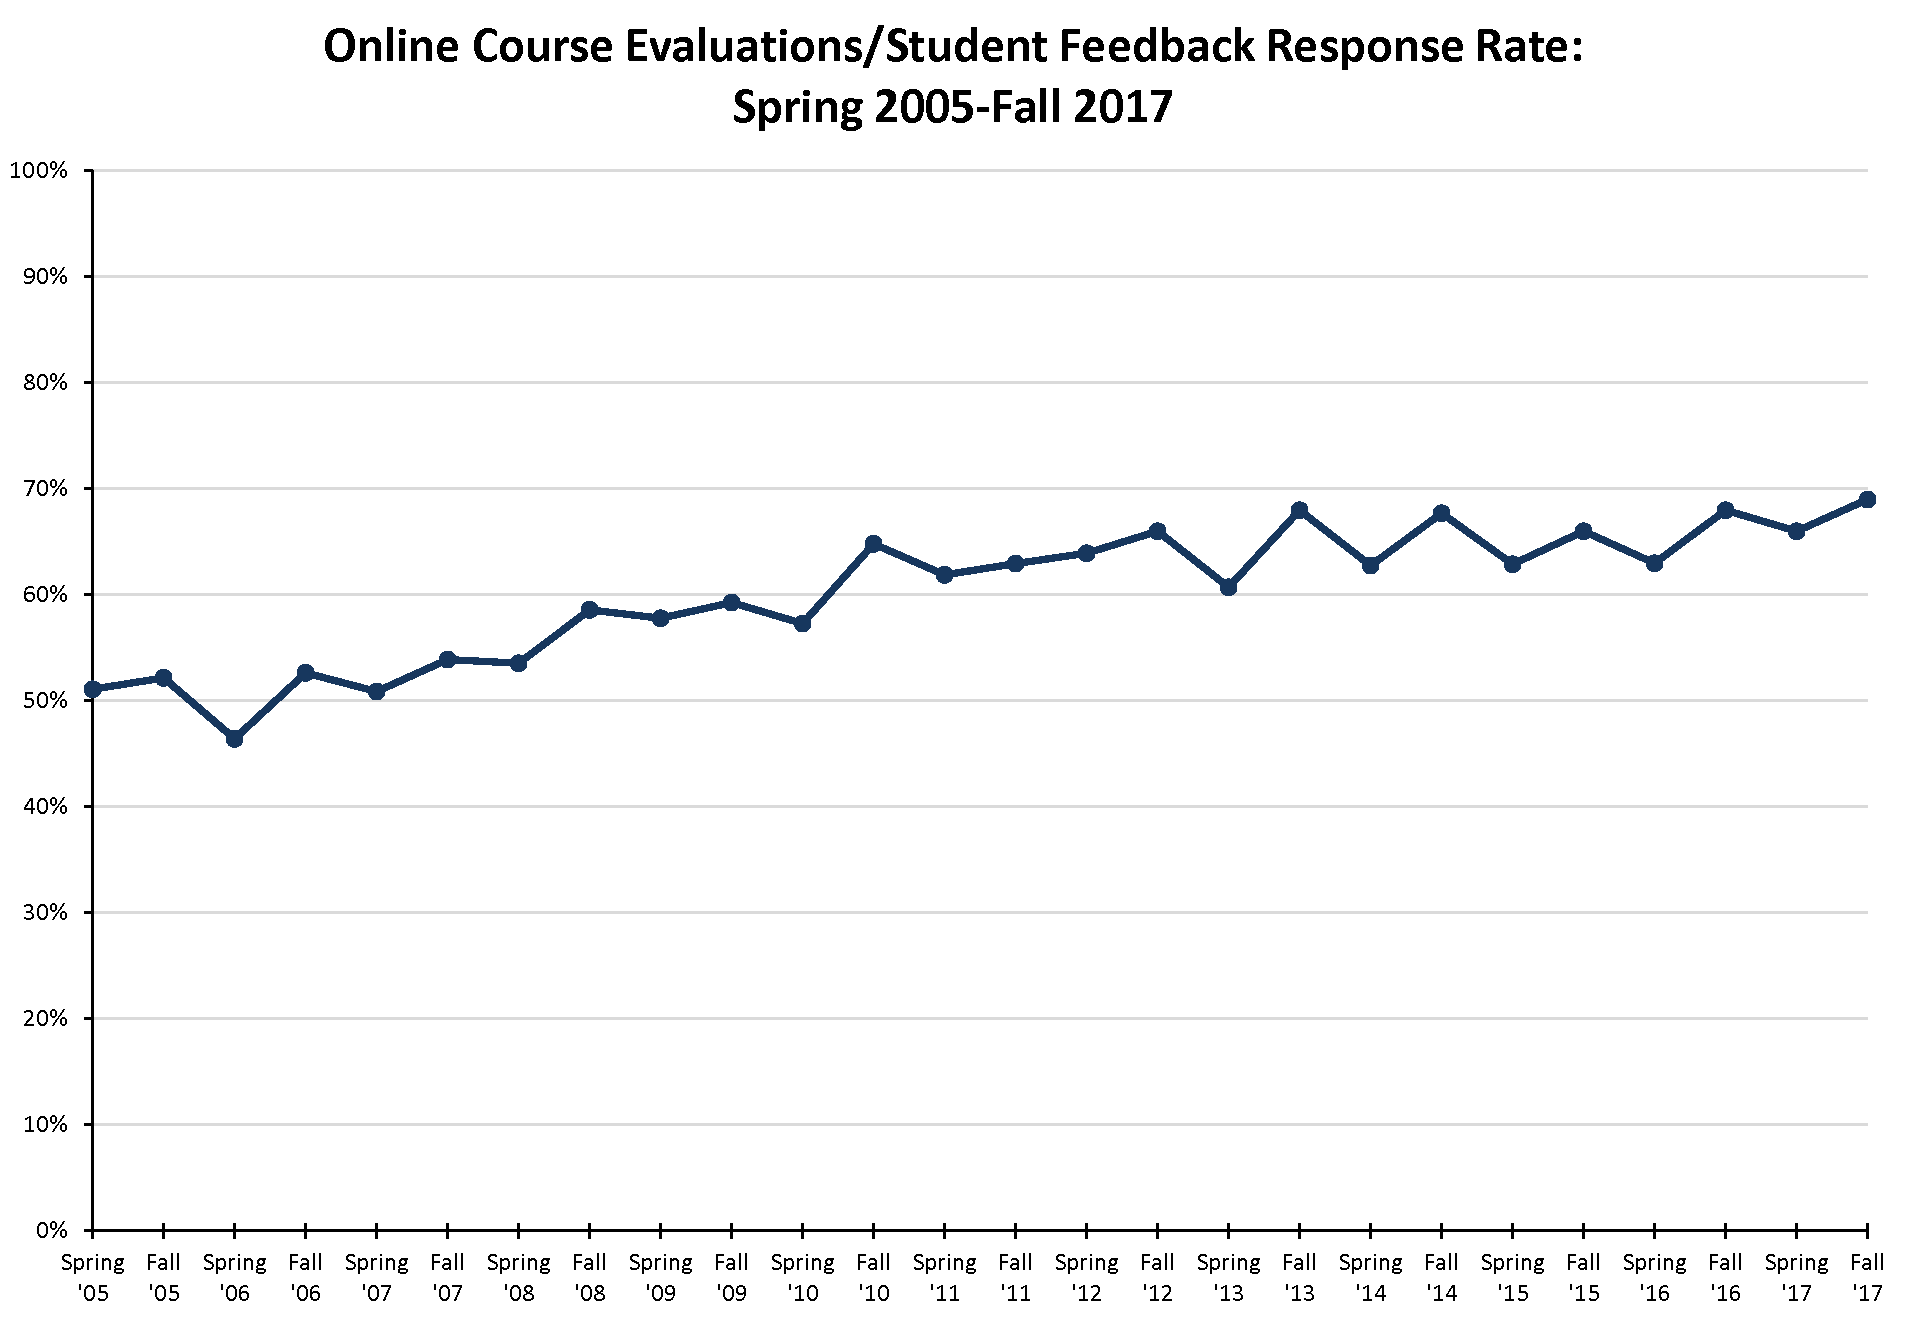 Student Feedback Response Rates, Spring 2005 to Fall 2017